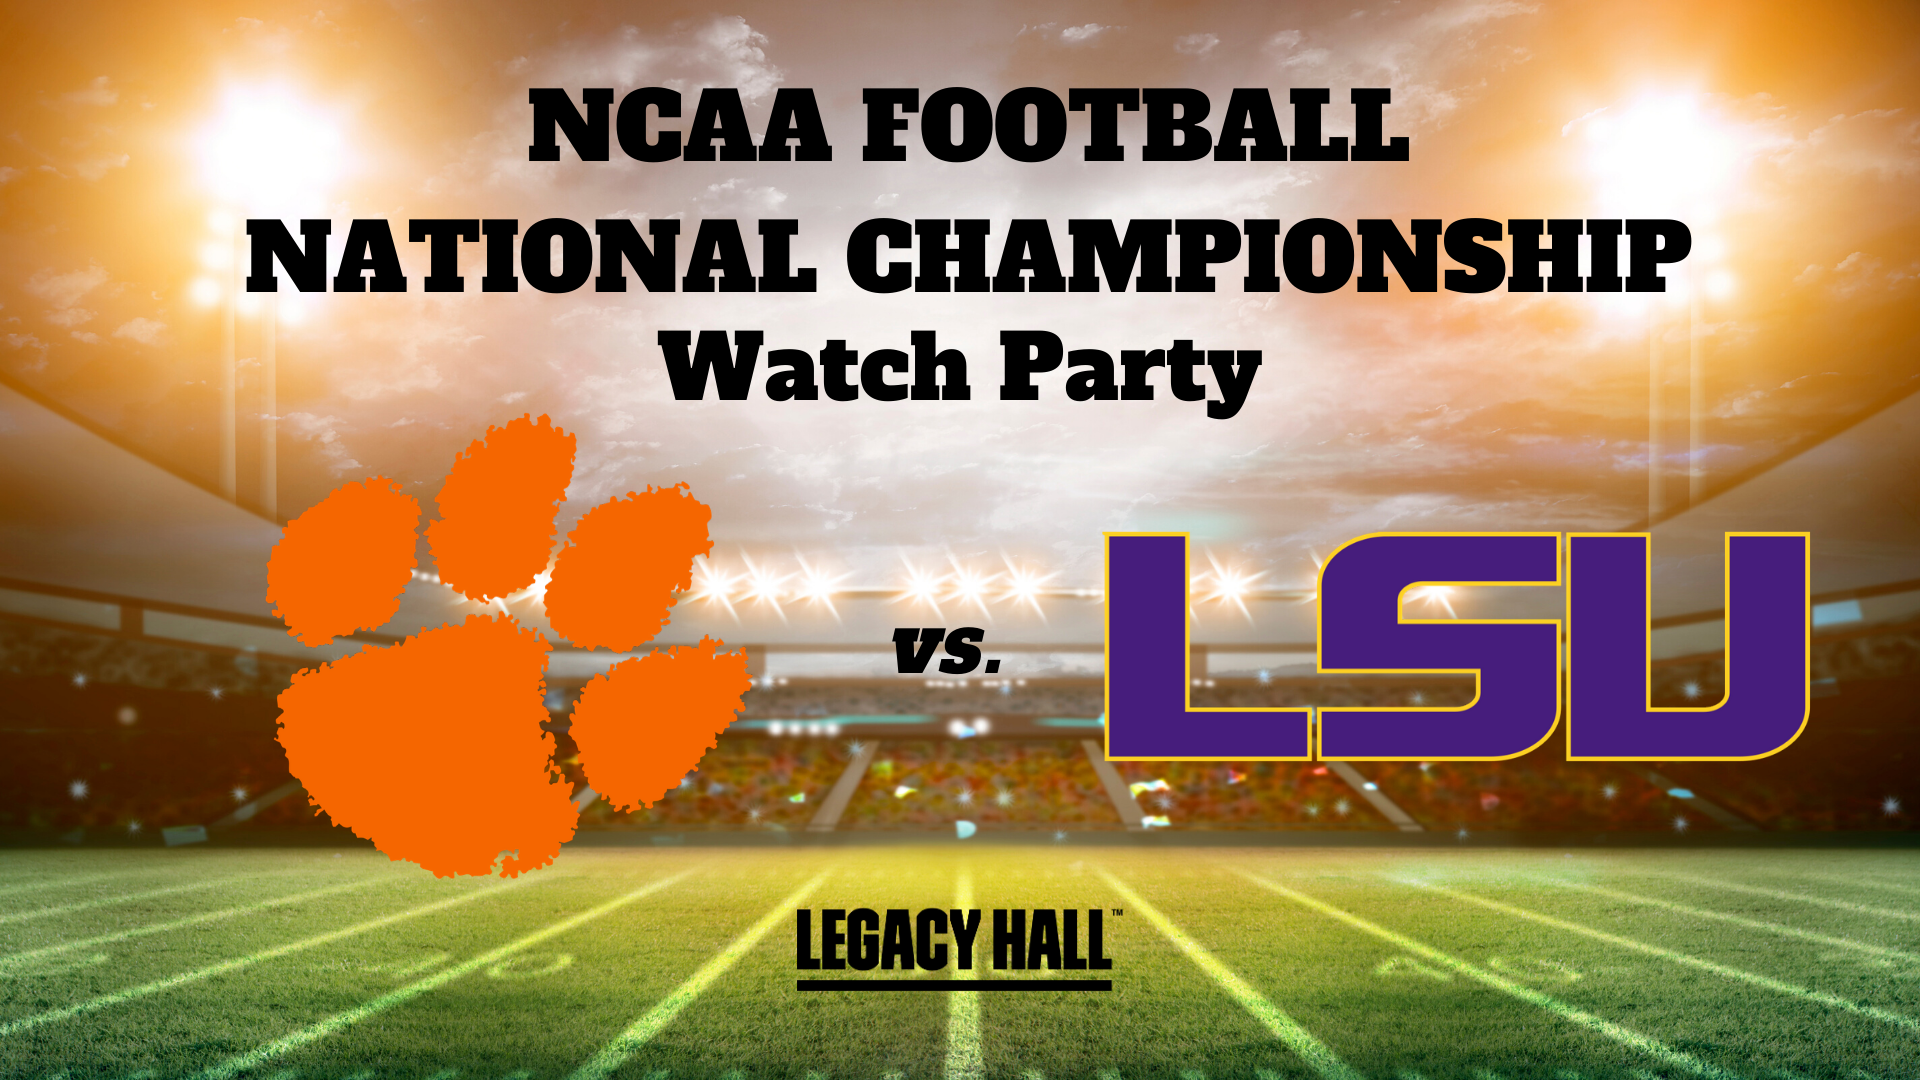 NCAA National Championship Watch Party - hero